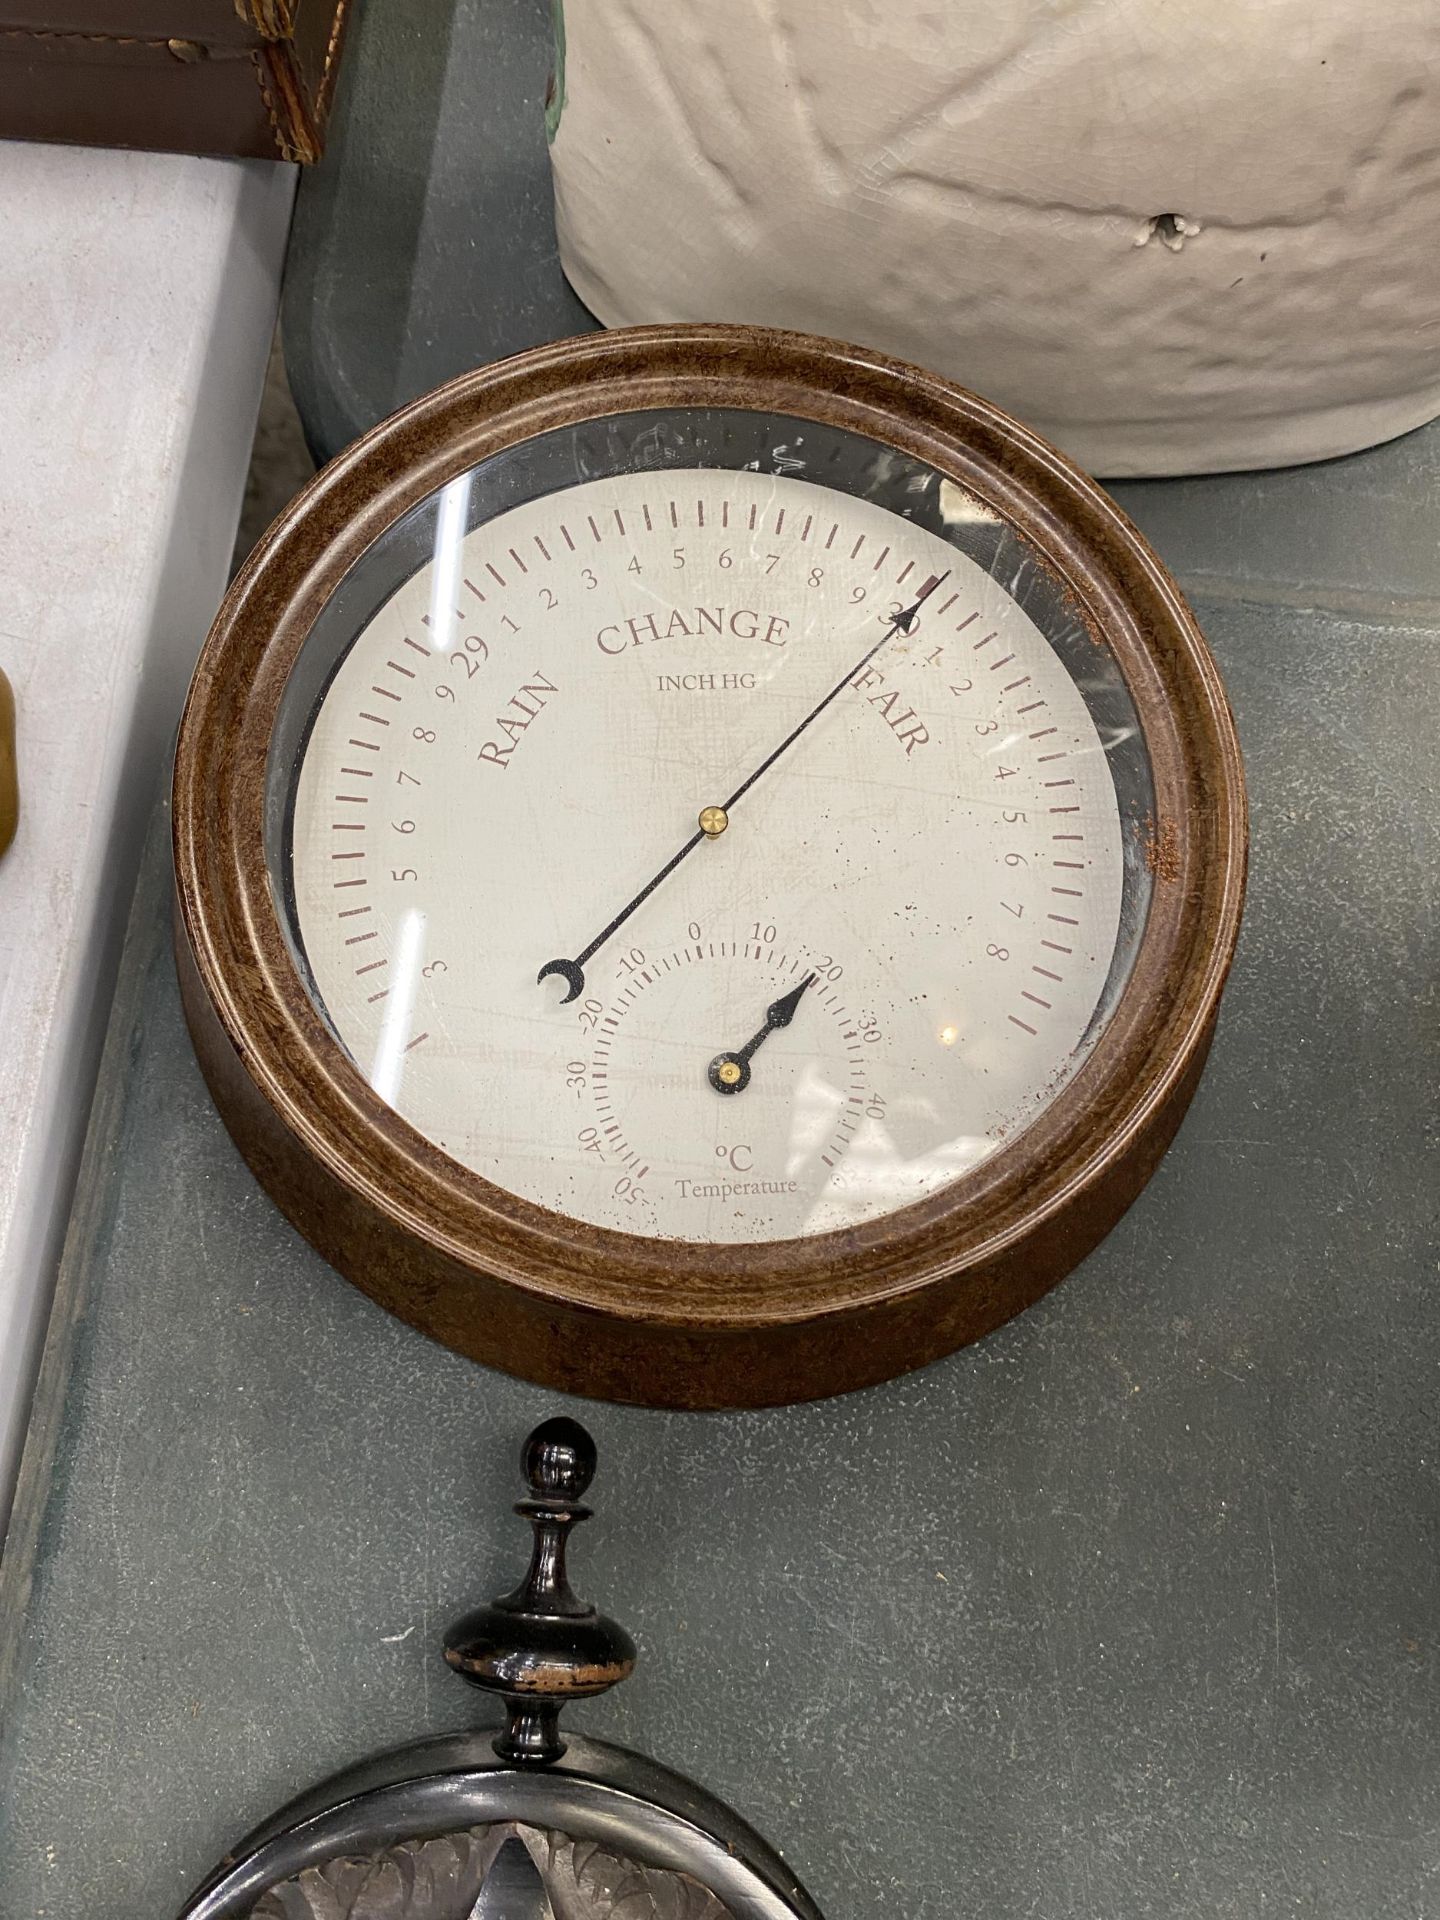 AN EBONY FRAMED VINTAGE BAROMETER AND THERMOMETER PLUS A ROUND METAL BAROMETER - Image 4 of 4